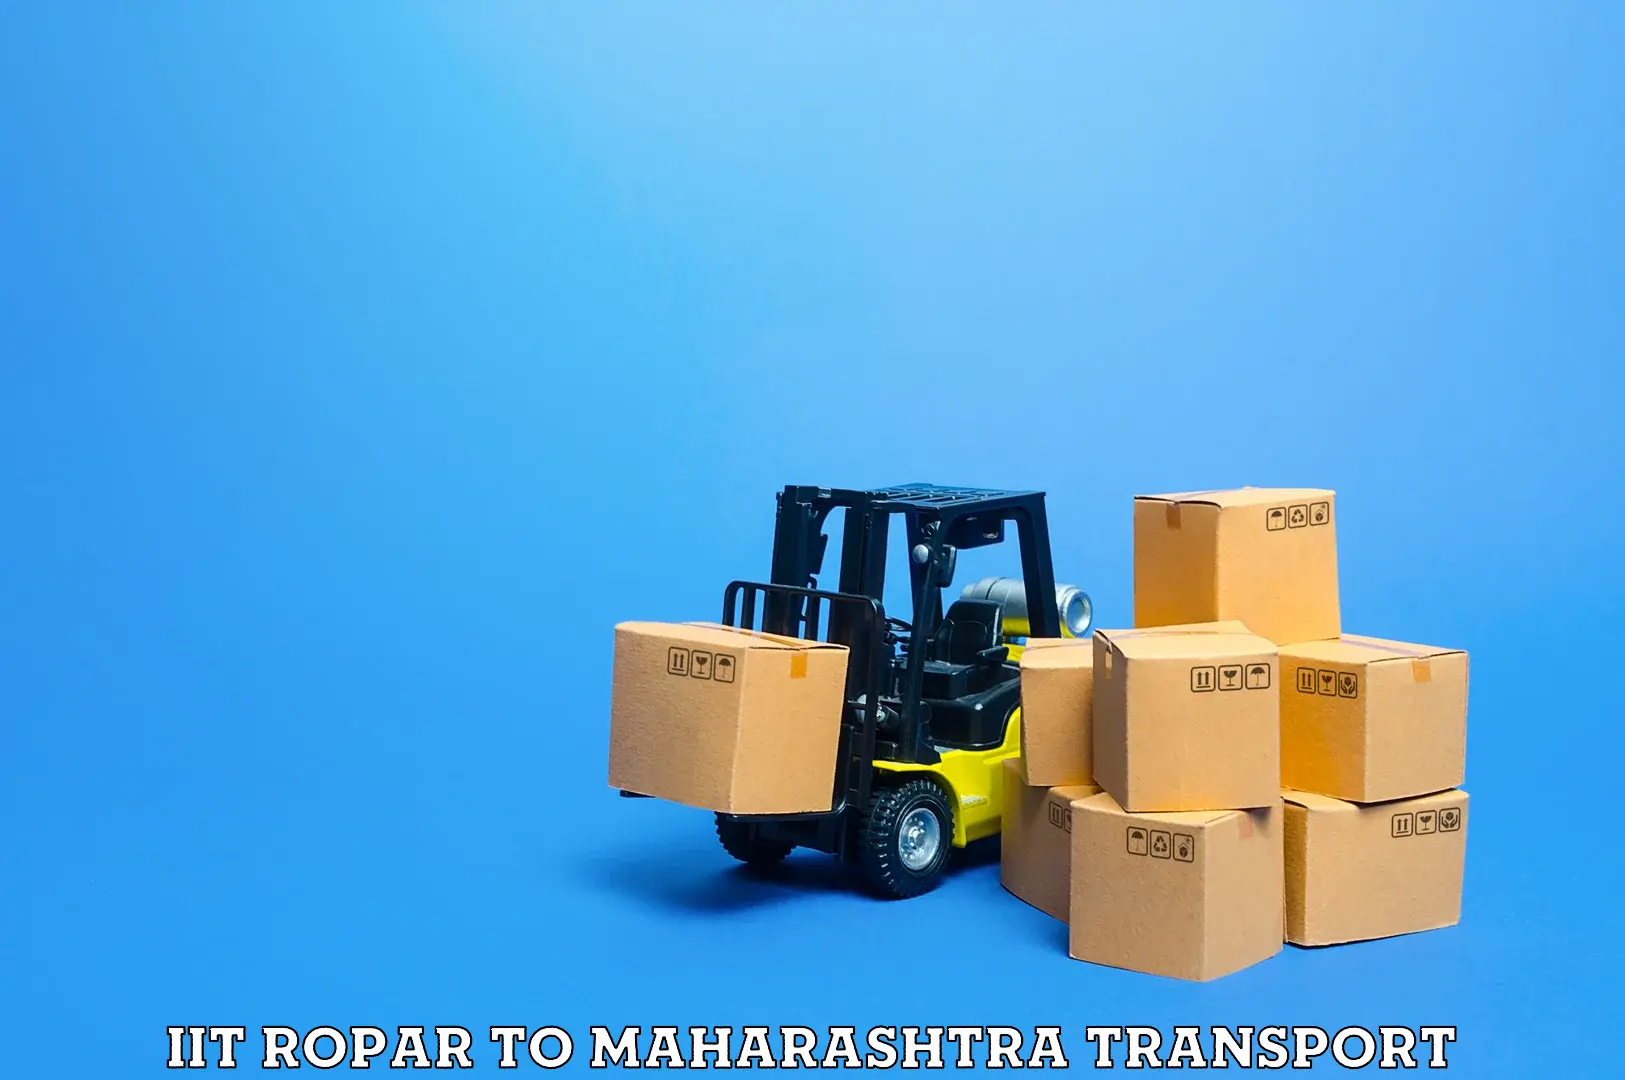 Express transport services in IIT Ropar to Virar